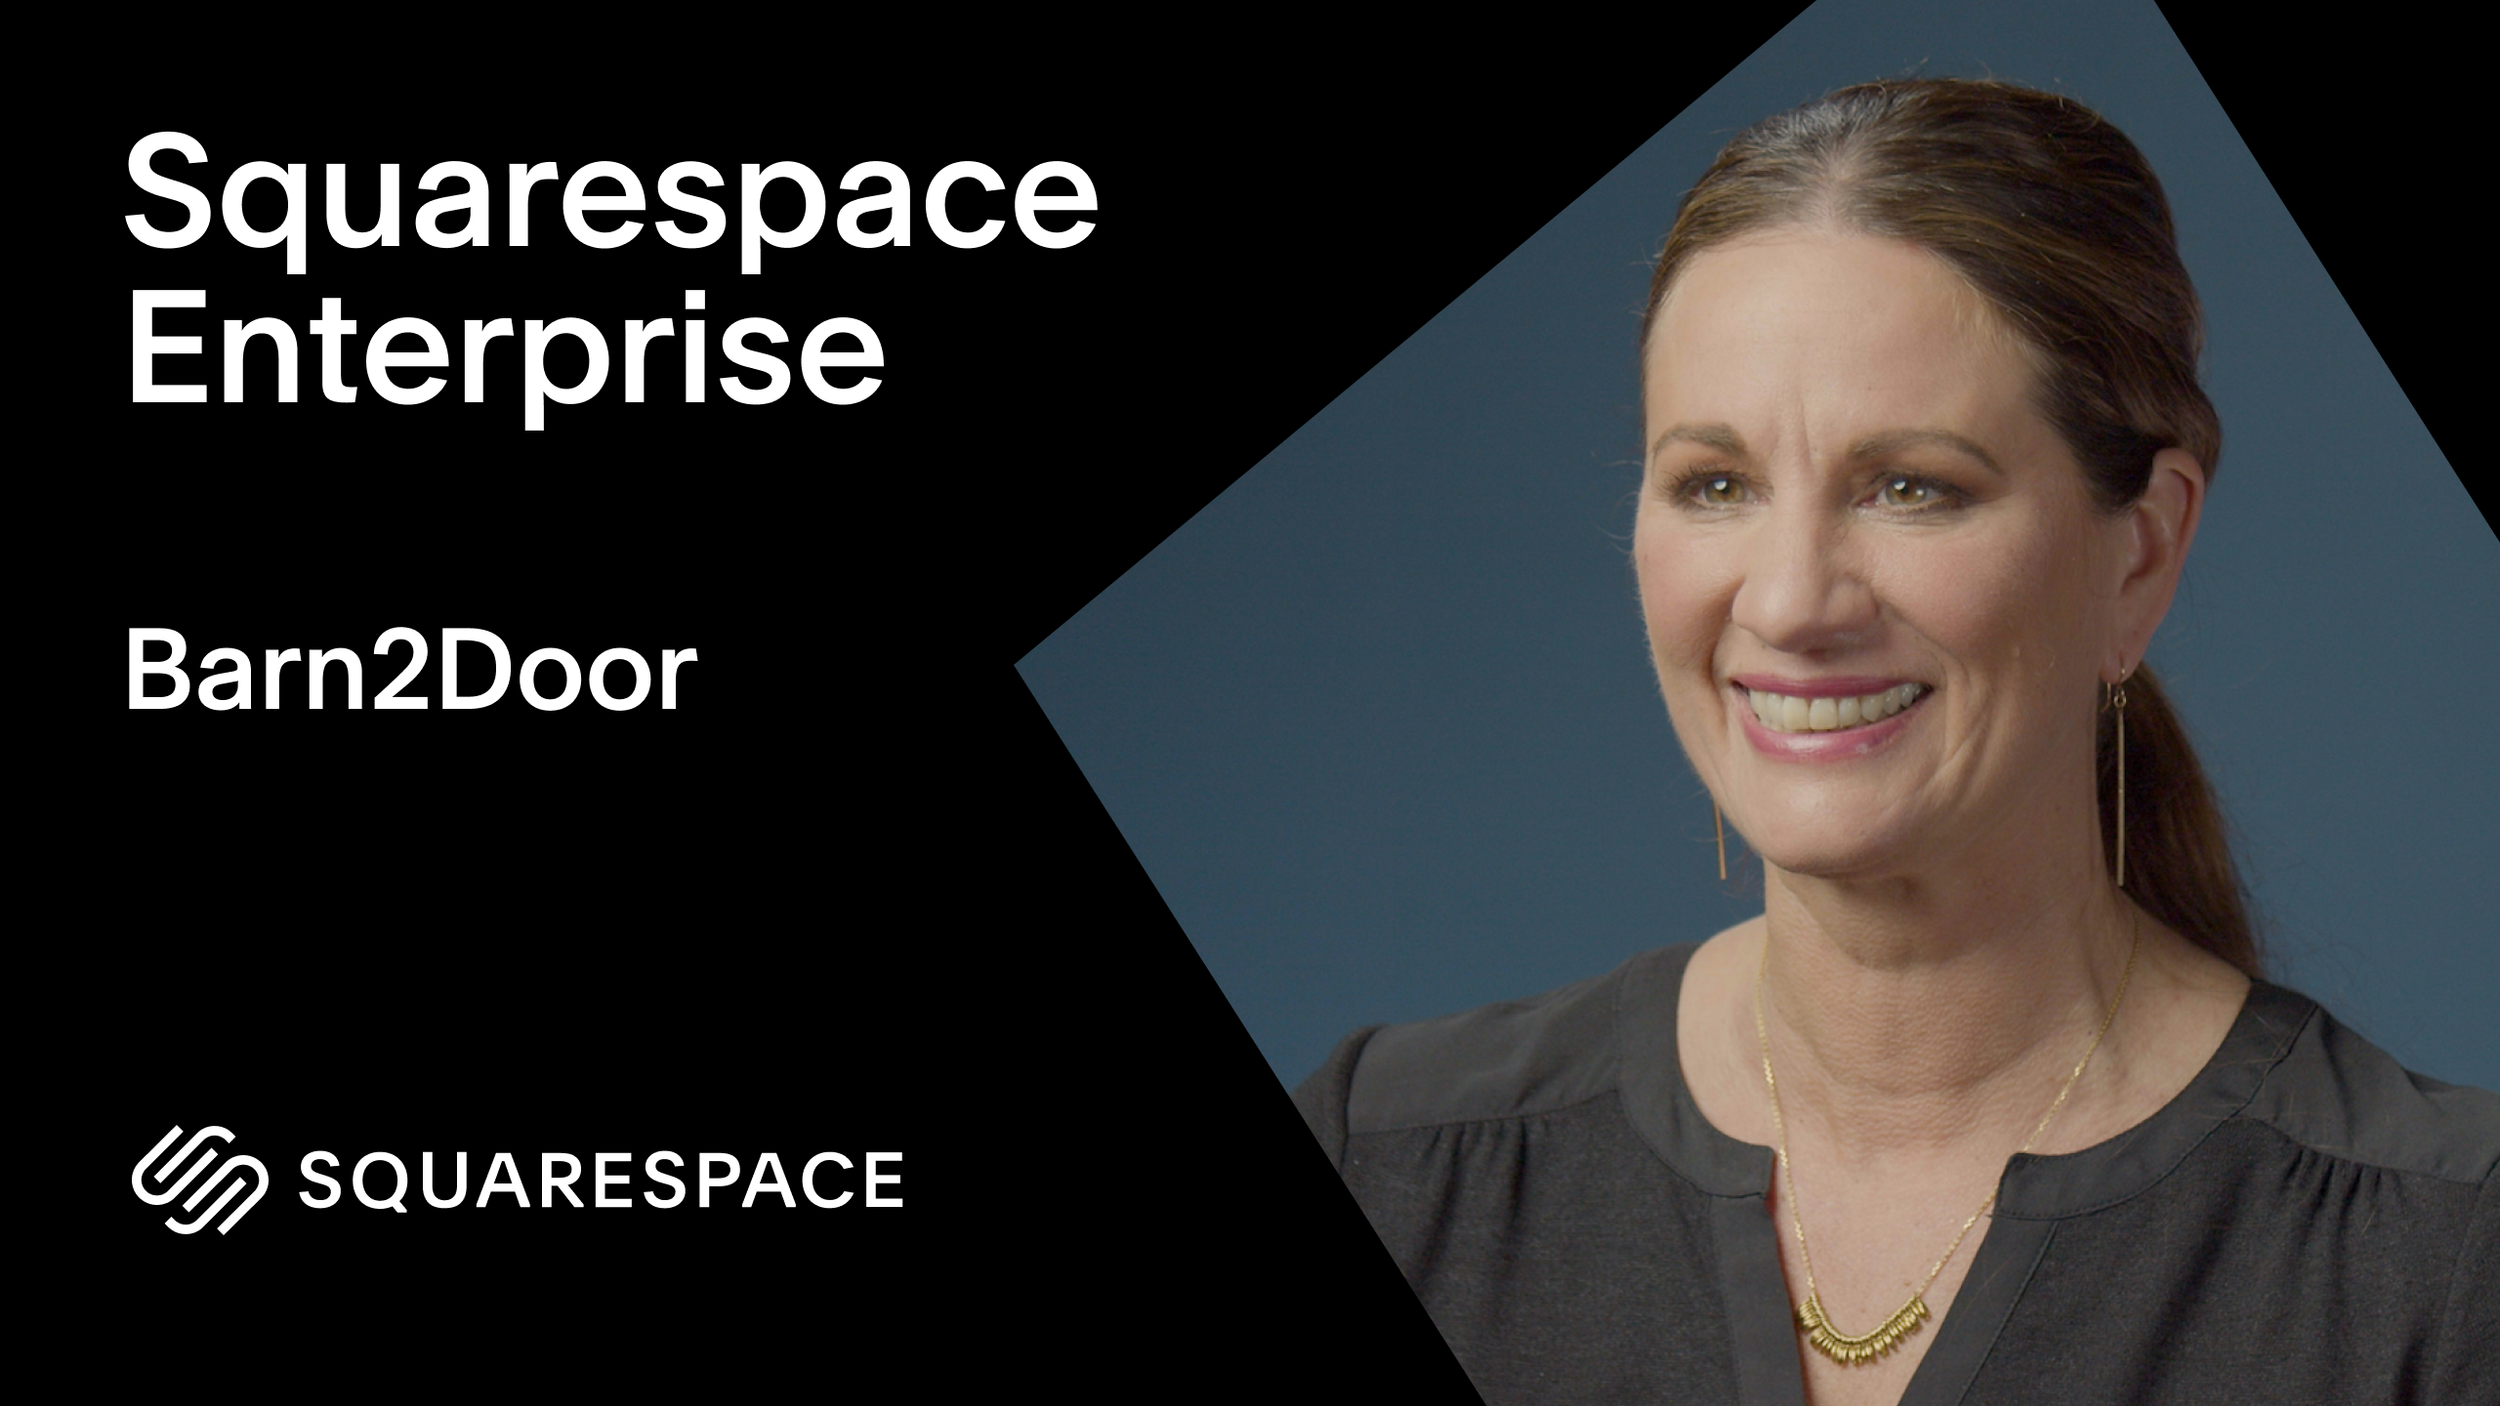 Video Testimonial: How Barn2Door Uses Squarespace Enterprise to Build and Manage Client Websites